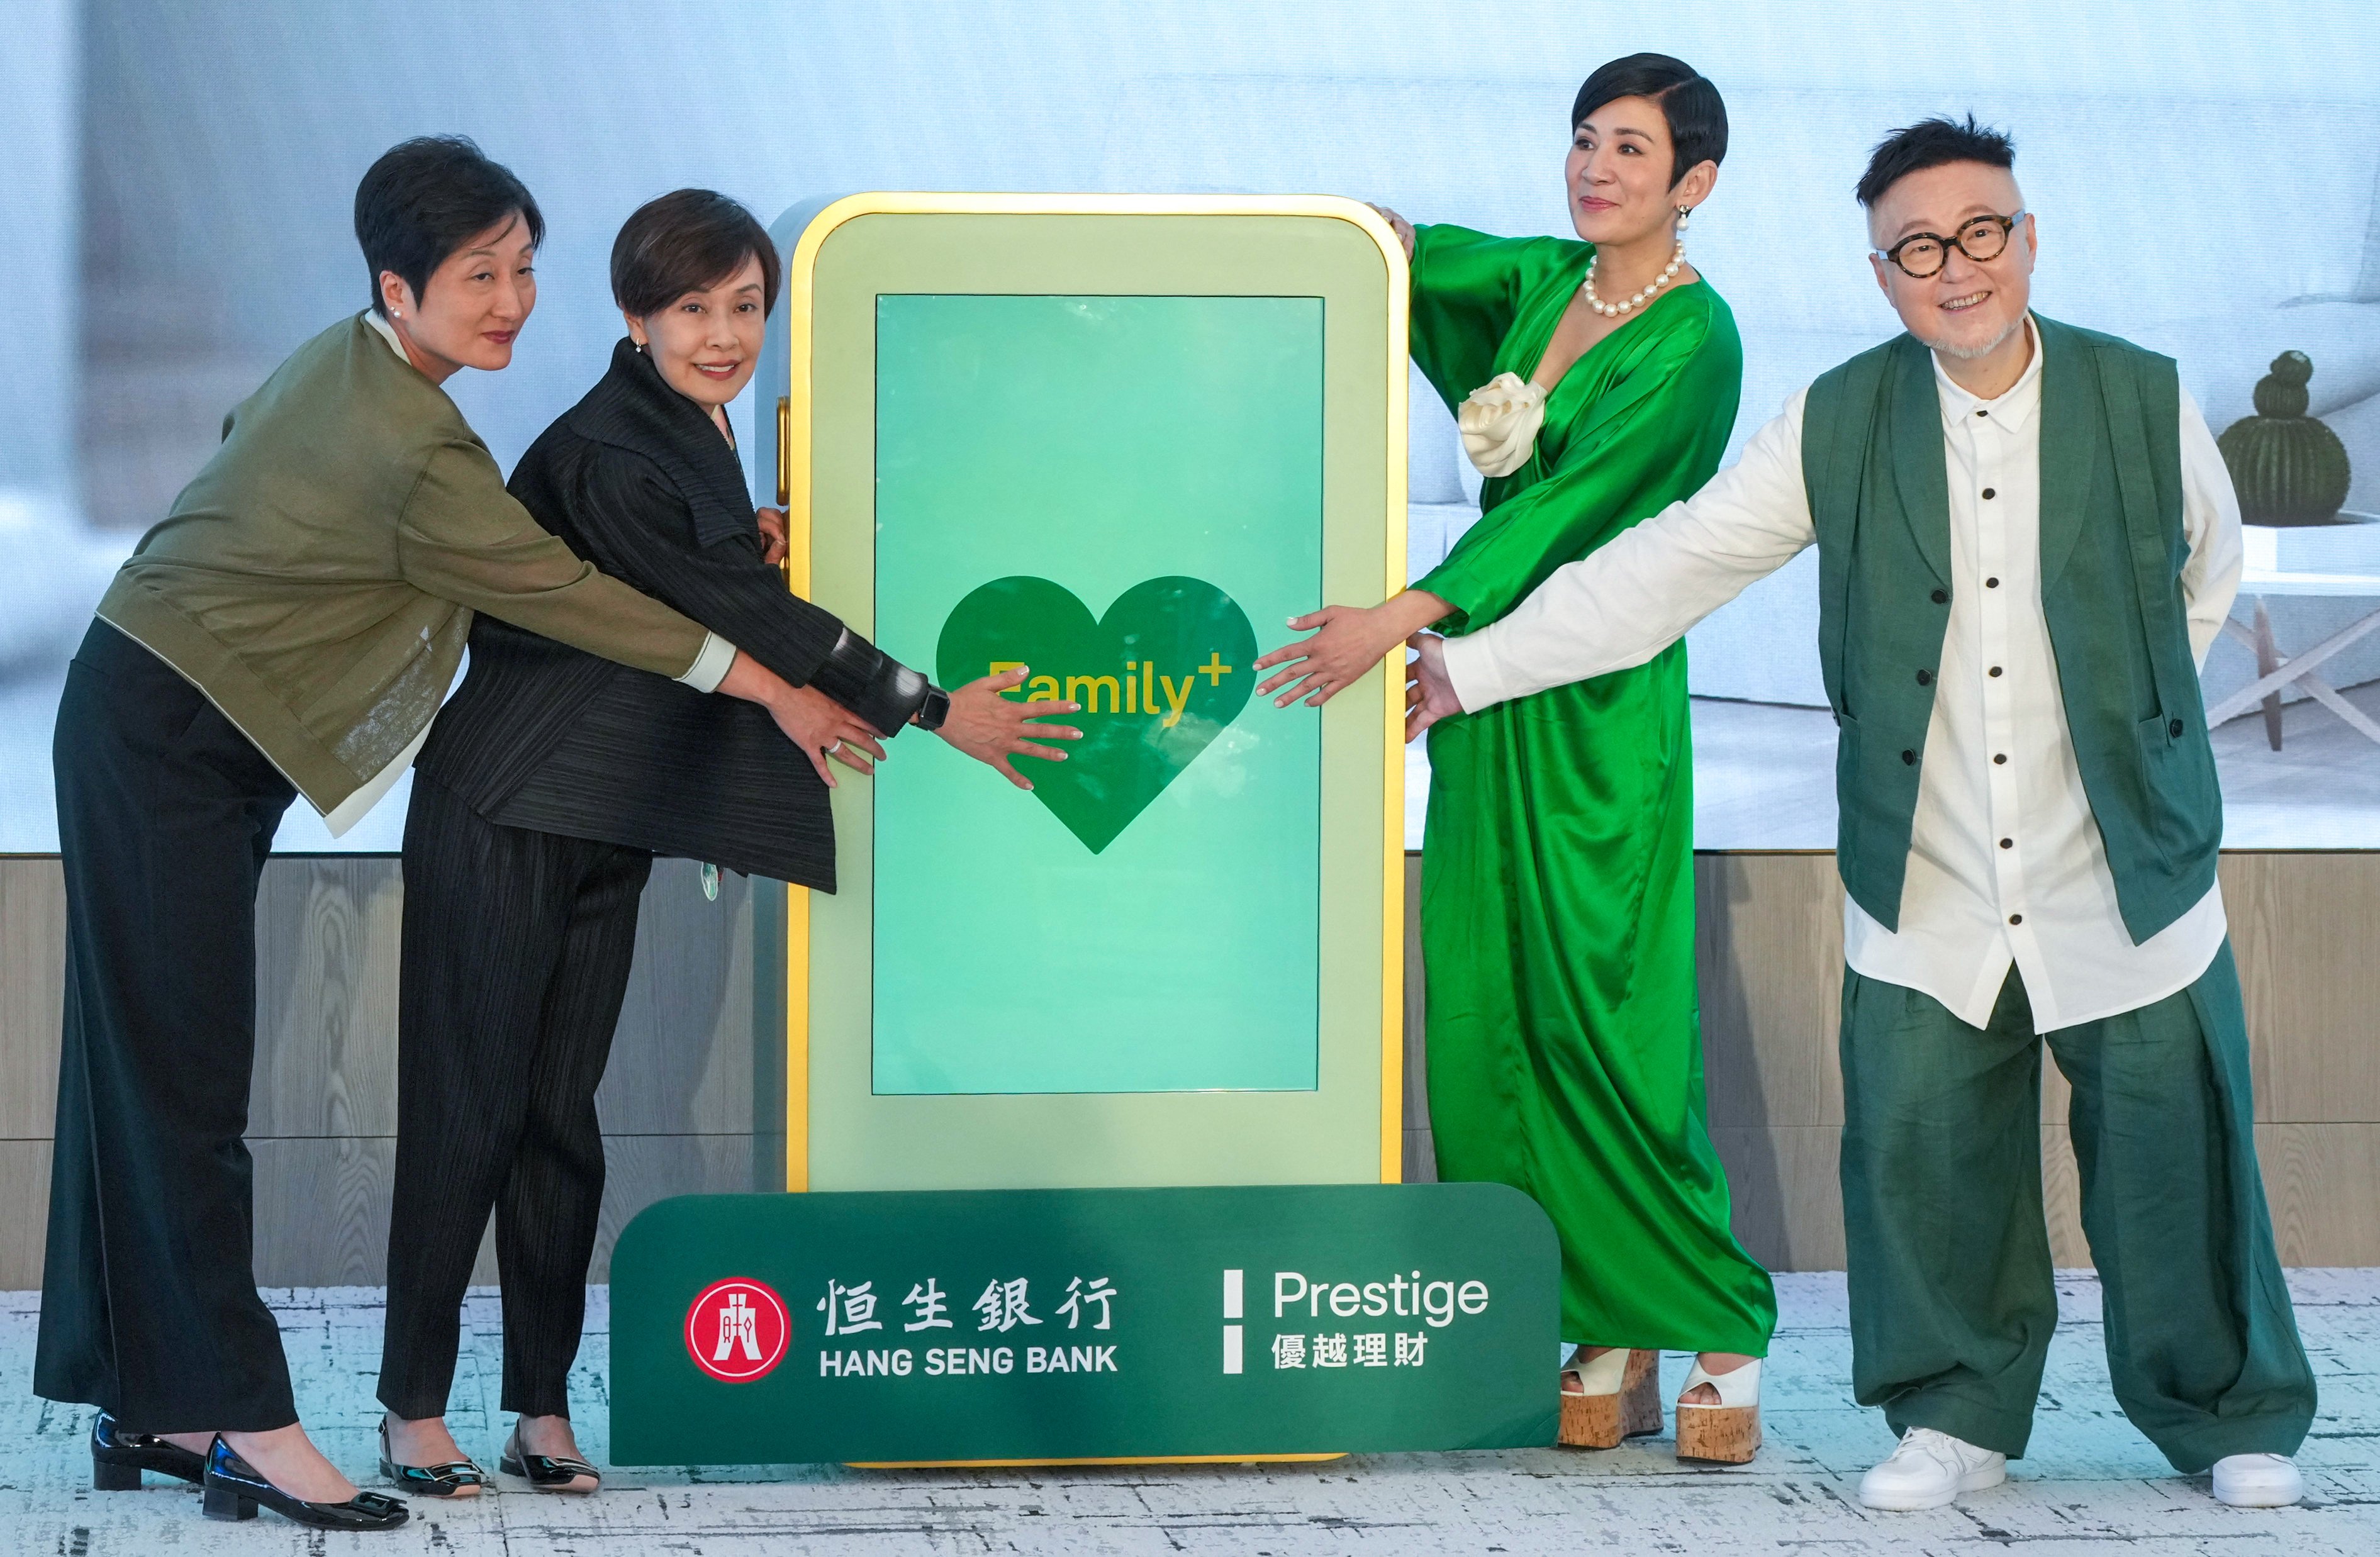 (From left) Hang Seng Bank’s head of wealth management and personal banking Rannie Lee and CEO Diana Cesar are joined by actress Sandra Ng and director Vincent Kok at the launch of the Prestige banking services in Hong Kong on Wednesday. Photo: May Tse